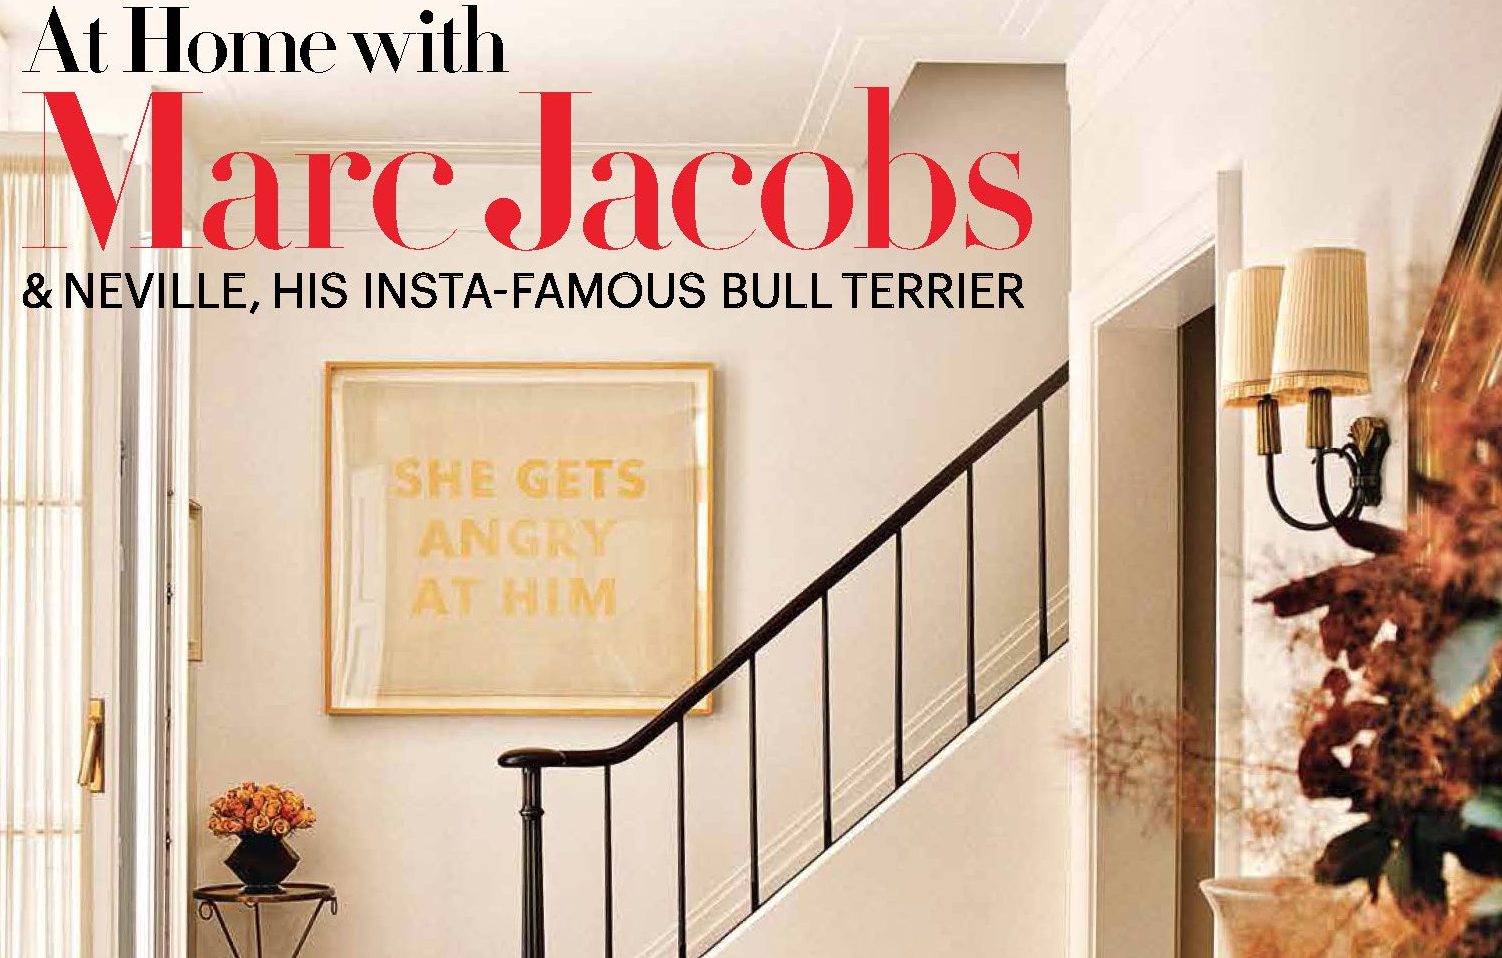 At Home with Marc Jacobs and Neville, His Insta-Famous Bull Terrier